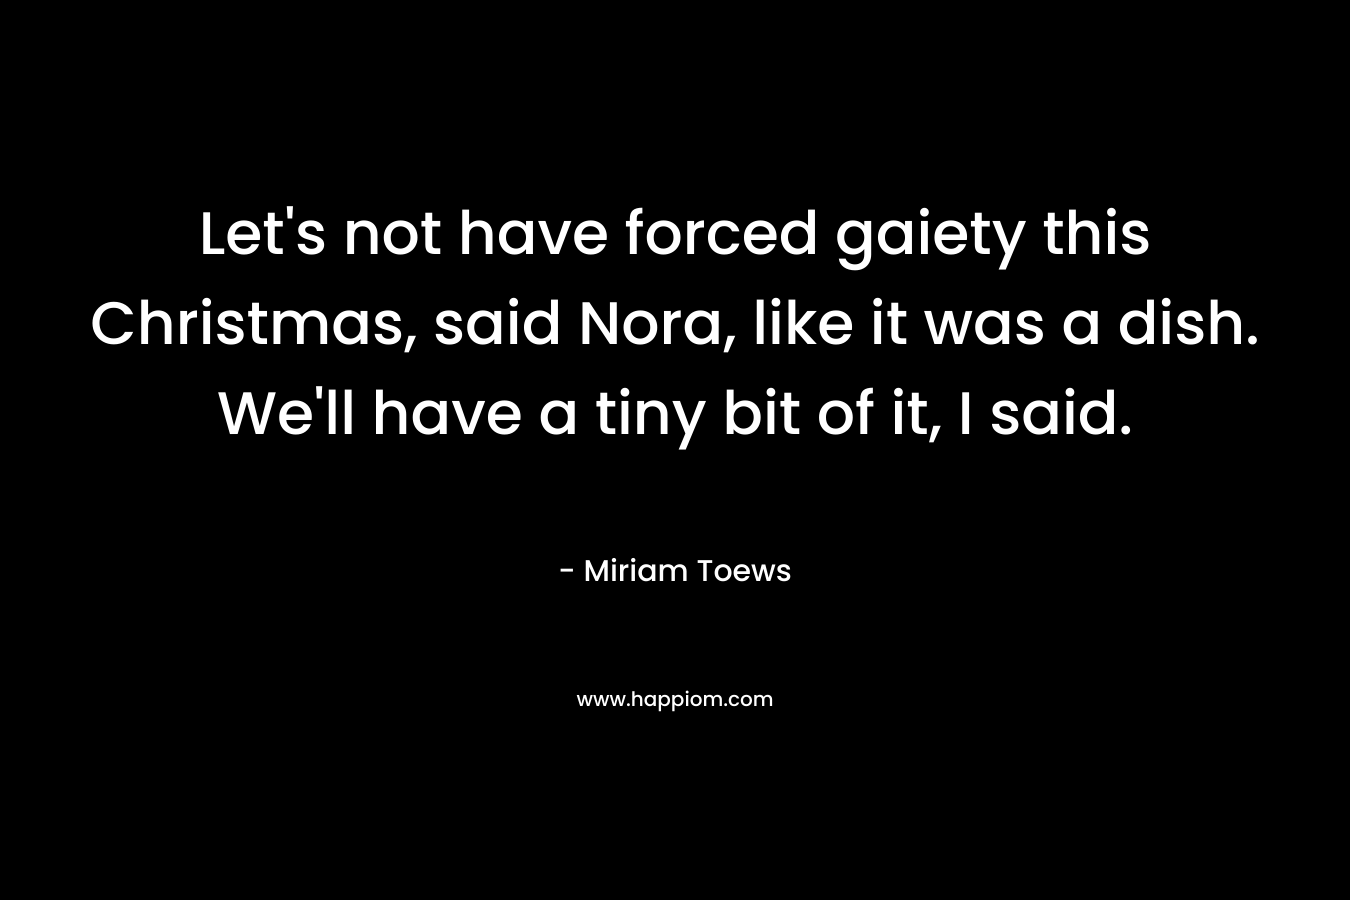 Let’s not have forced gaiety this Christmas, said Nora, like it was a dish. We’ll have a tiny bit of it, I said. – Miriam Toews